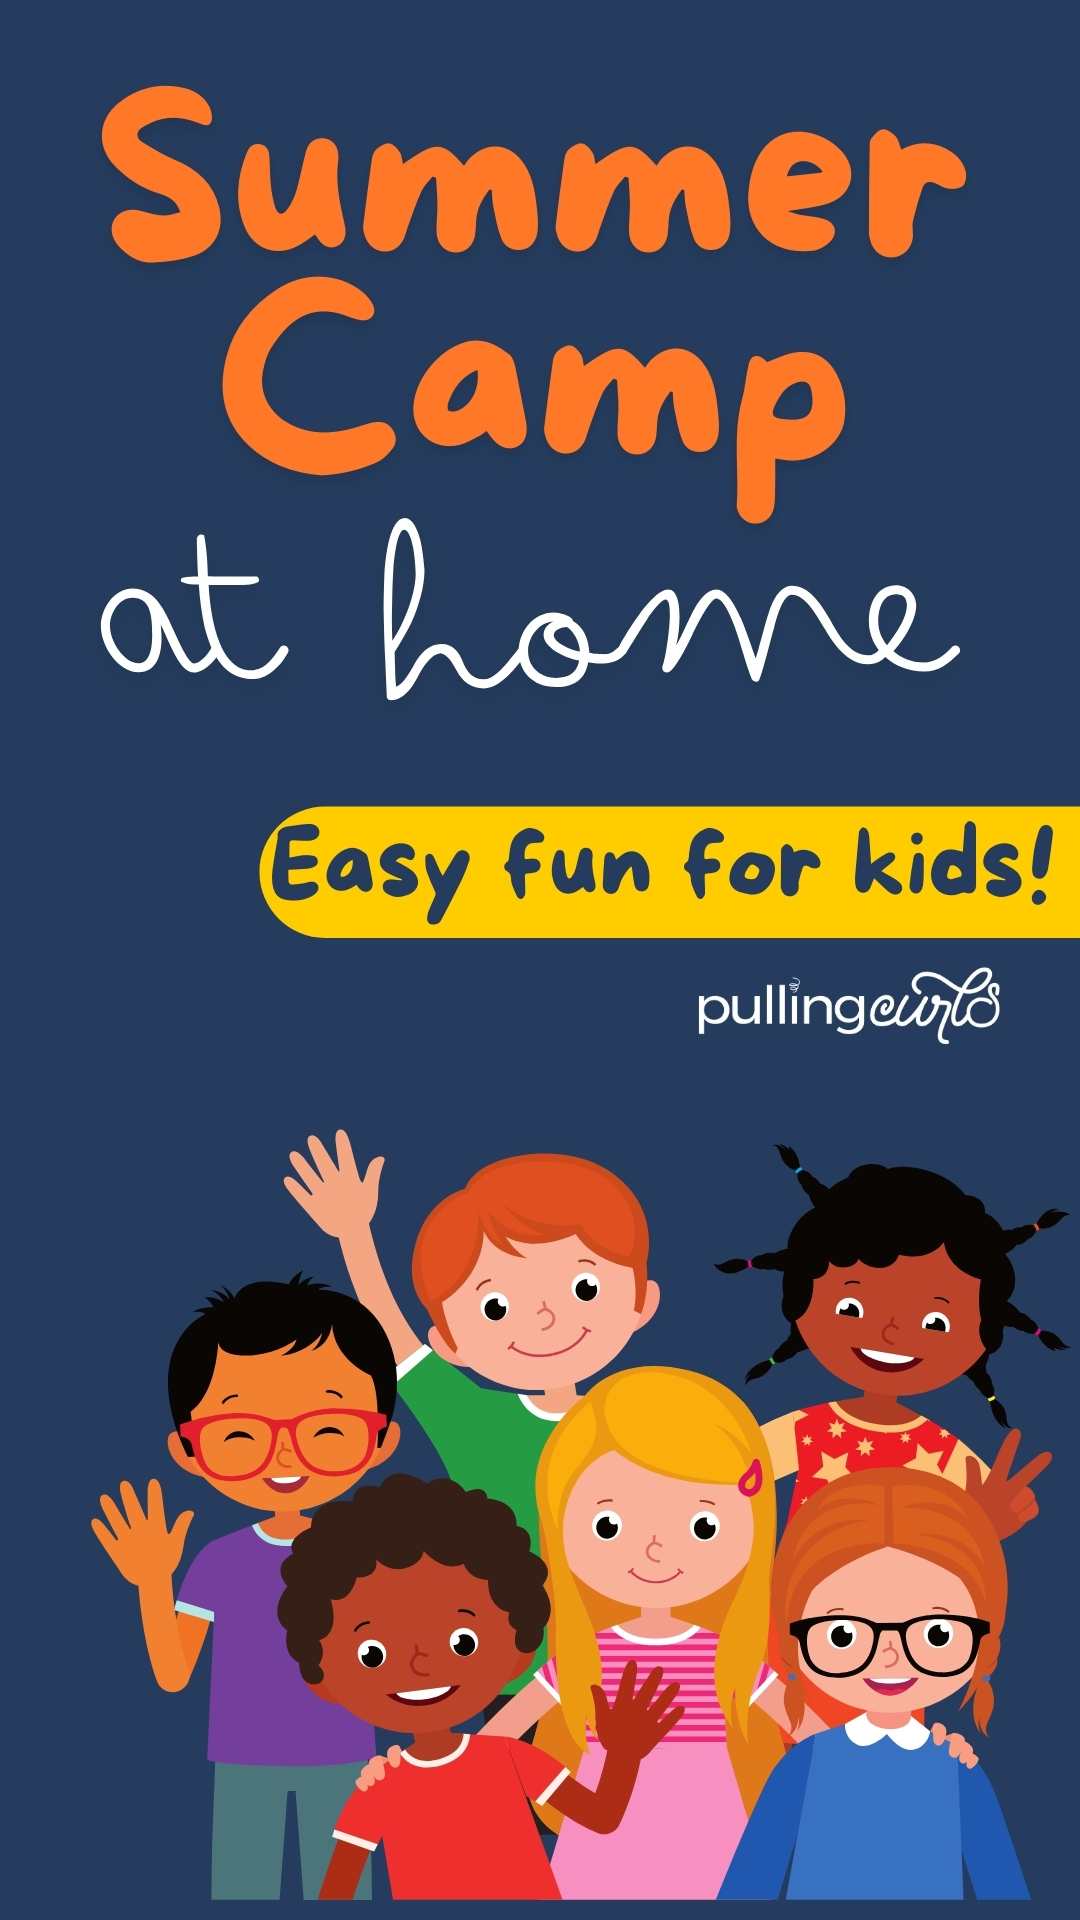 happy kids // summer camp at home -- easy fun for kids! via @pullingcurls